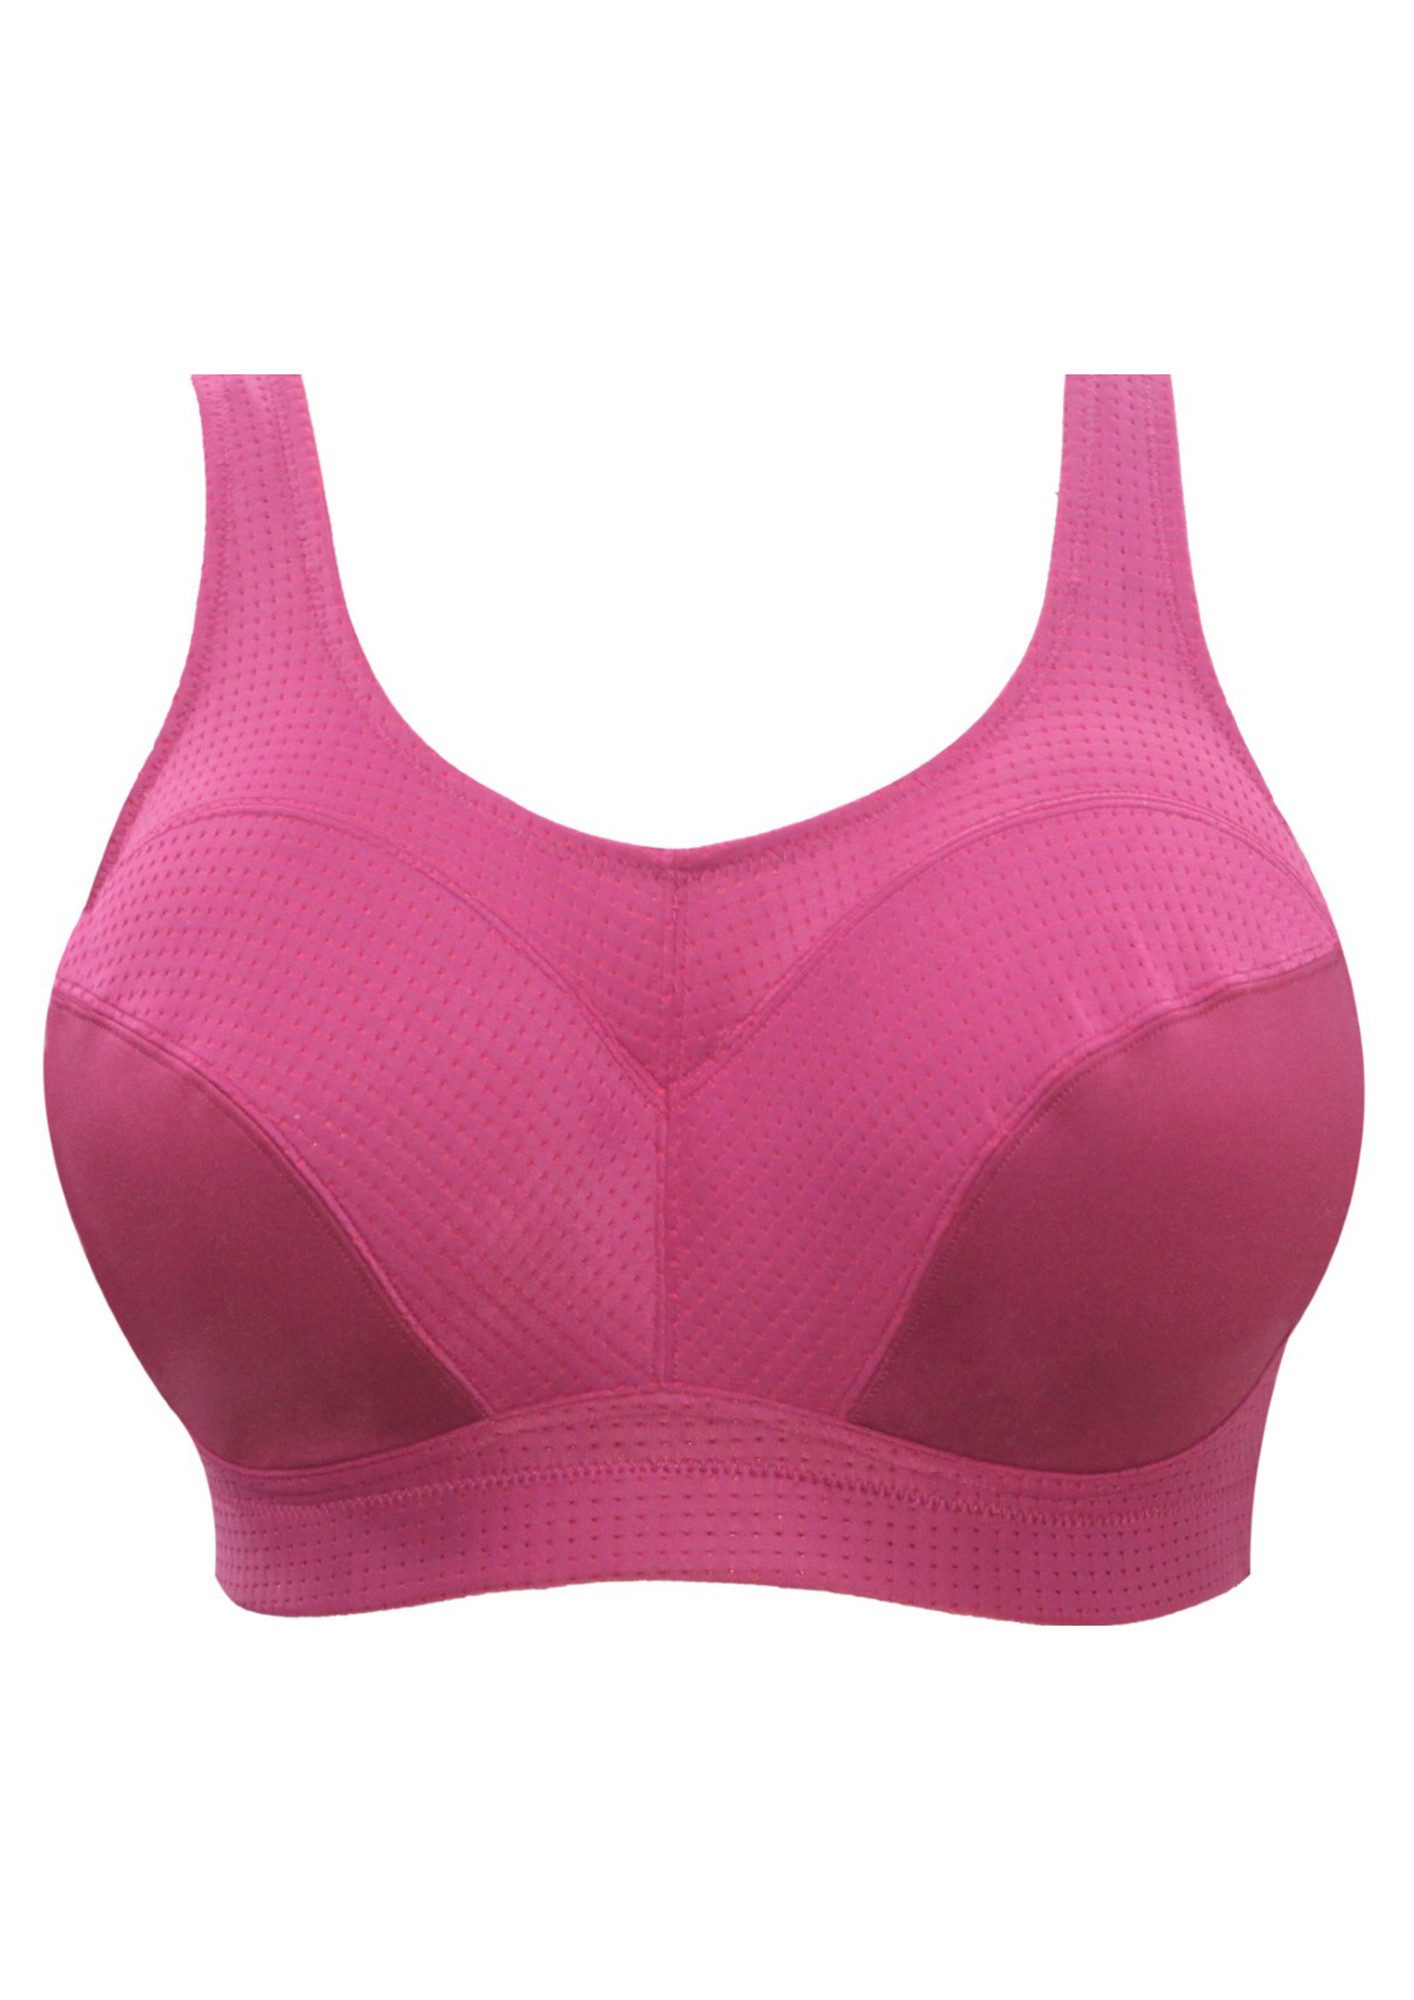 Red Unlined Sports Bras.